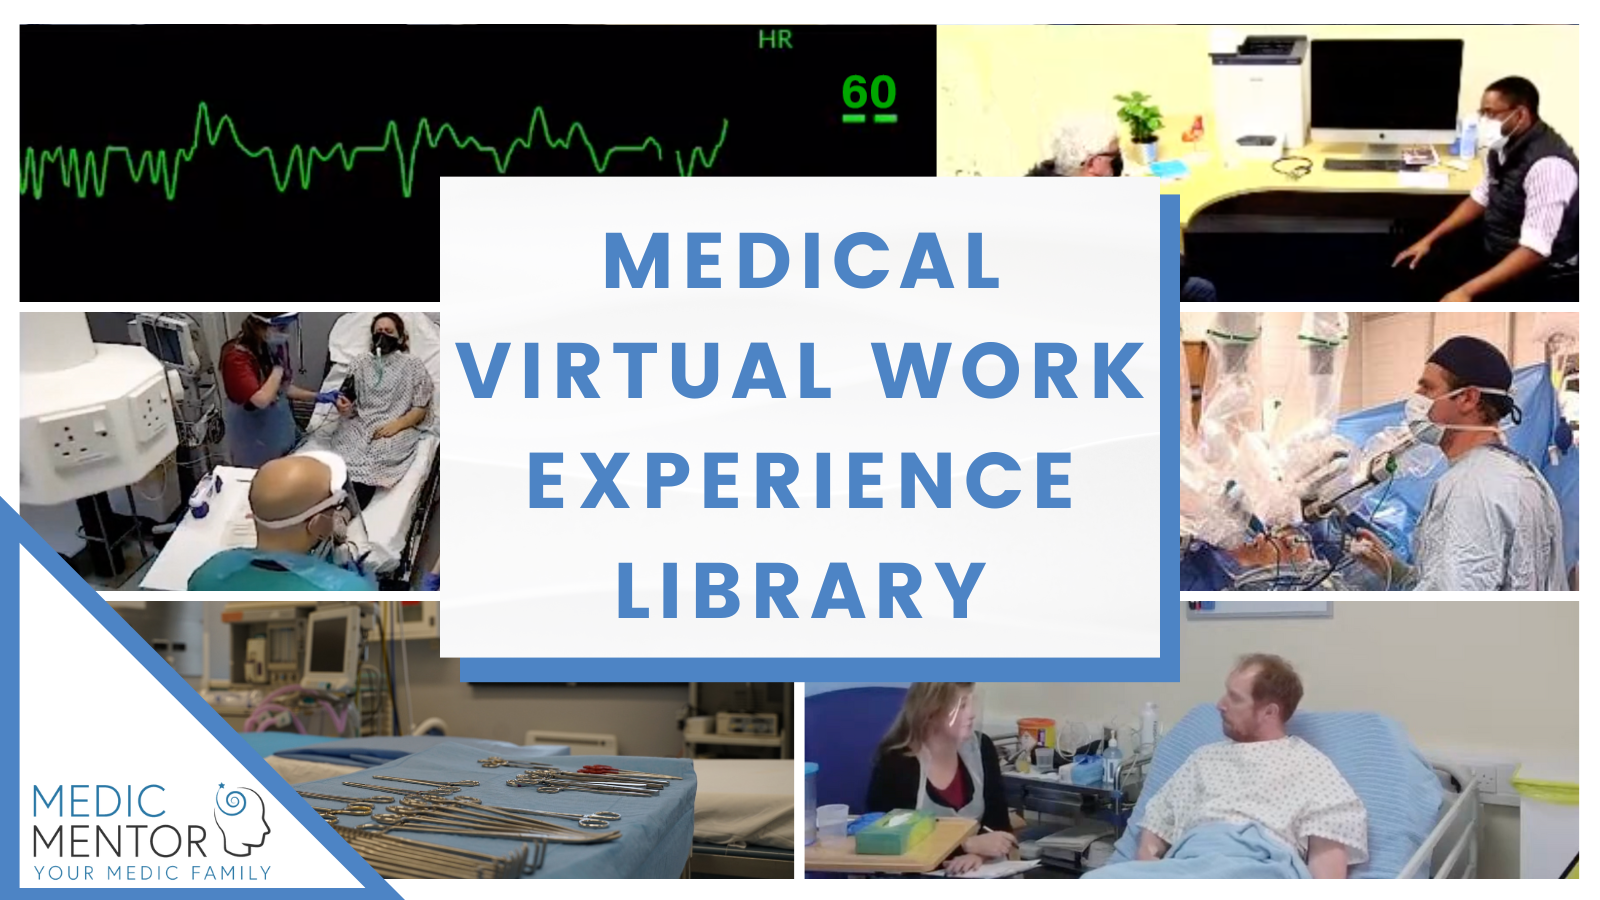 The Medical Work Experience Library